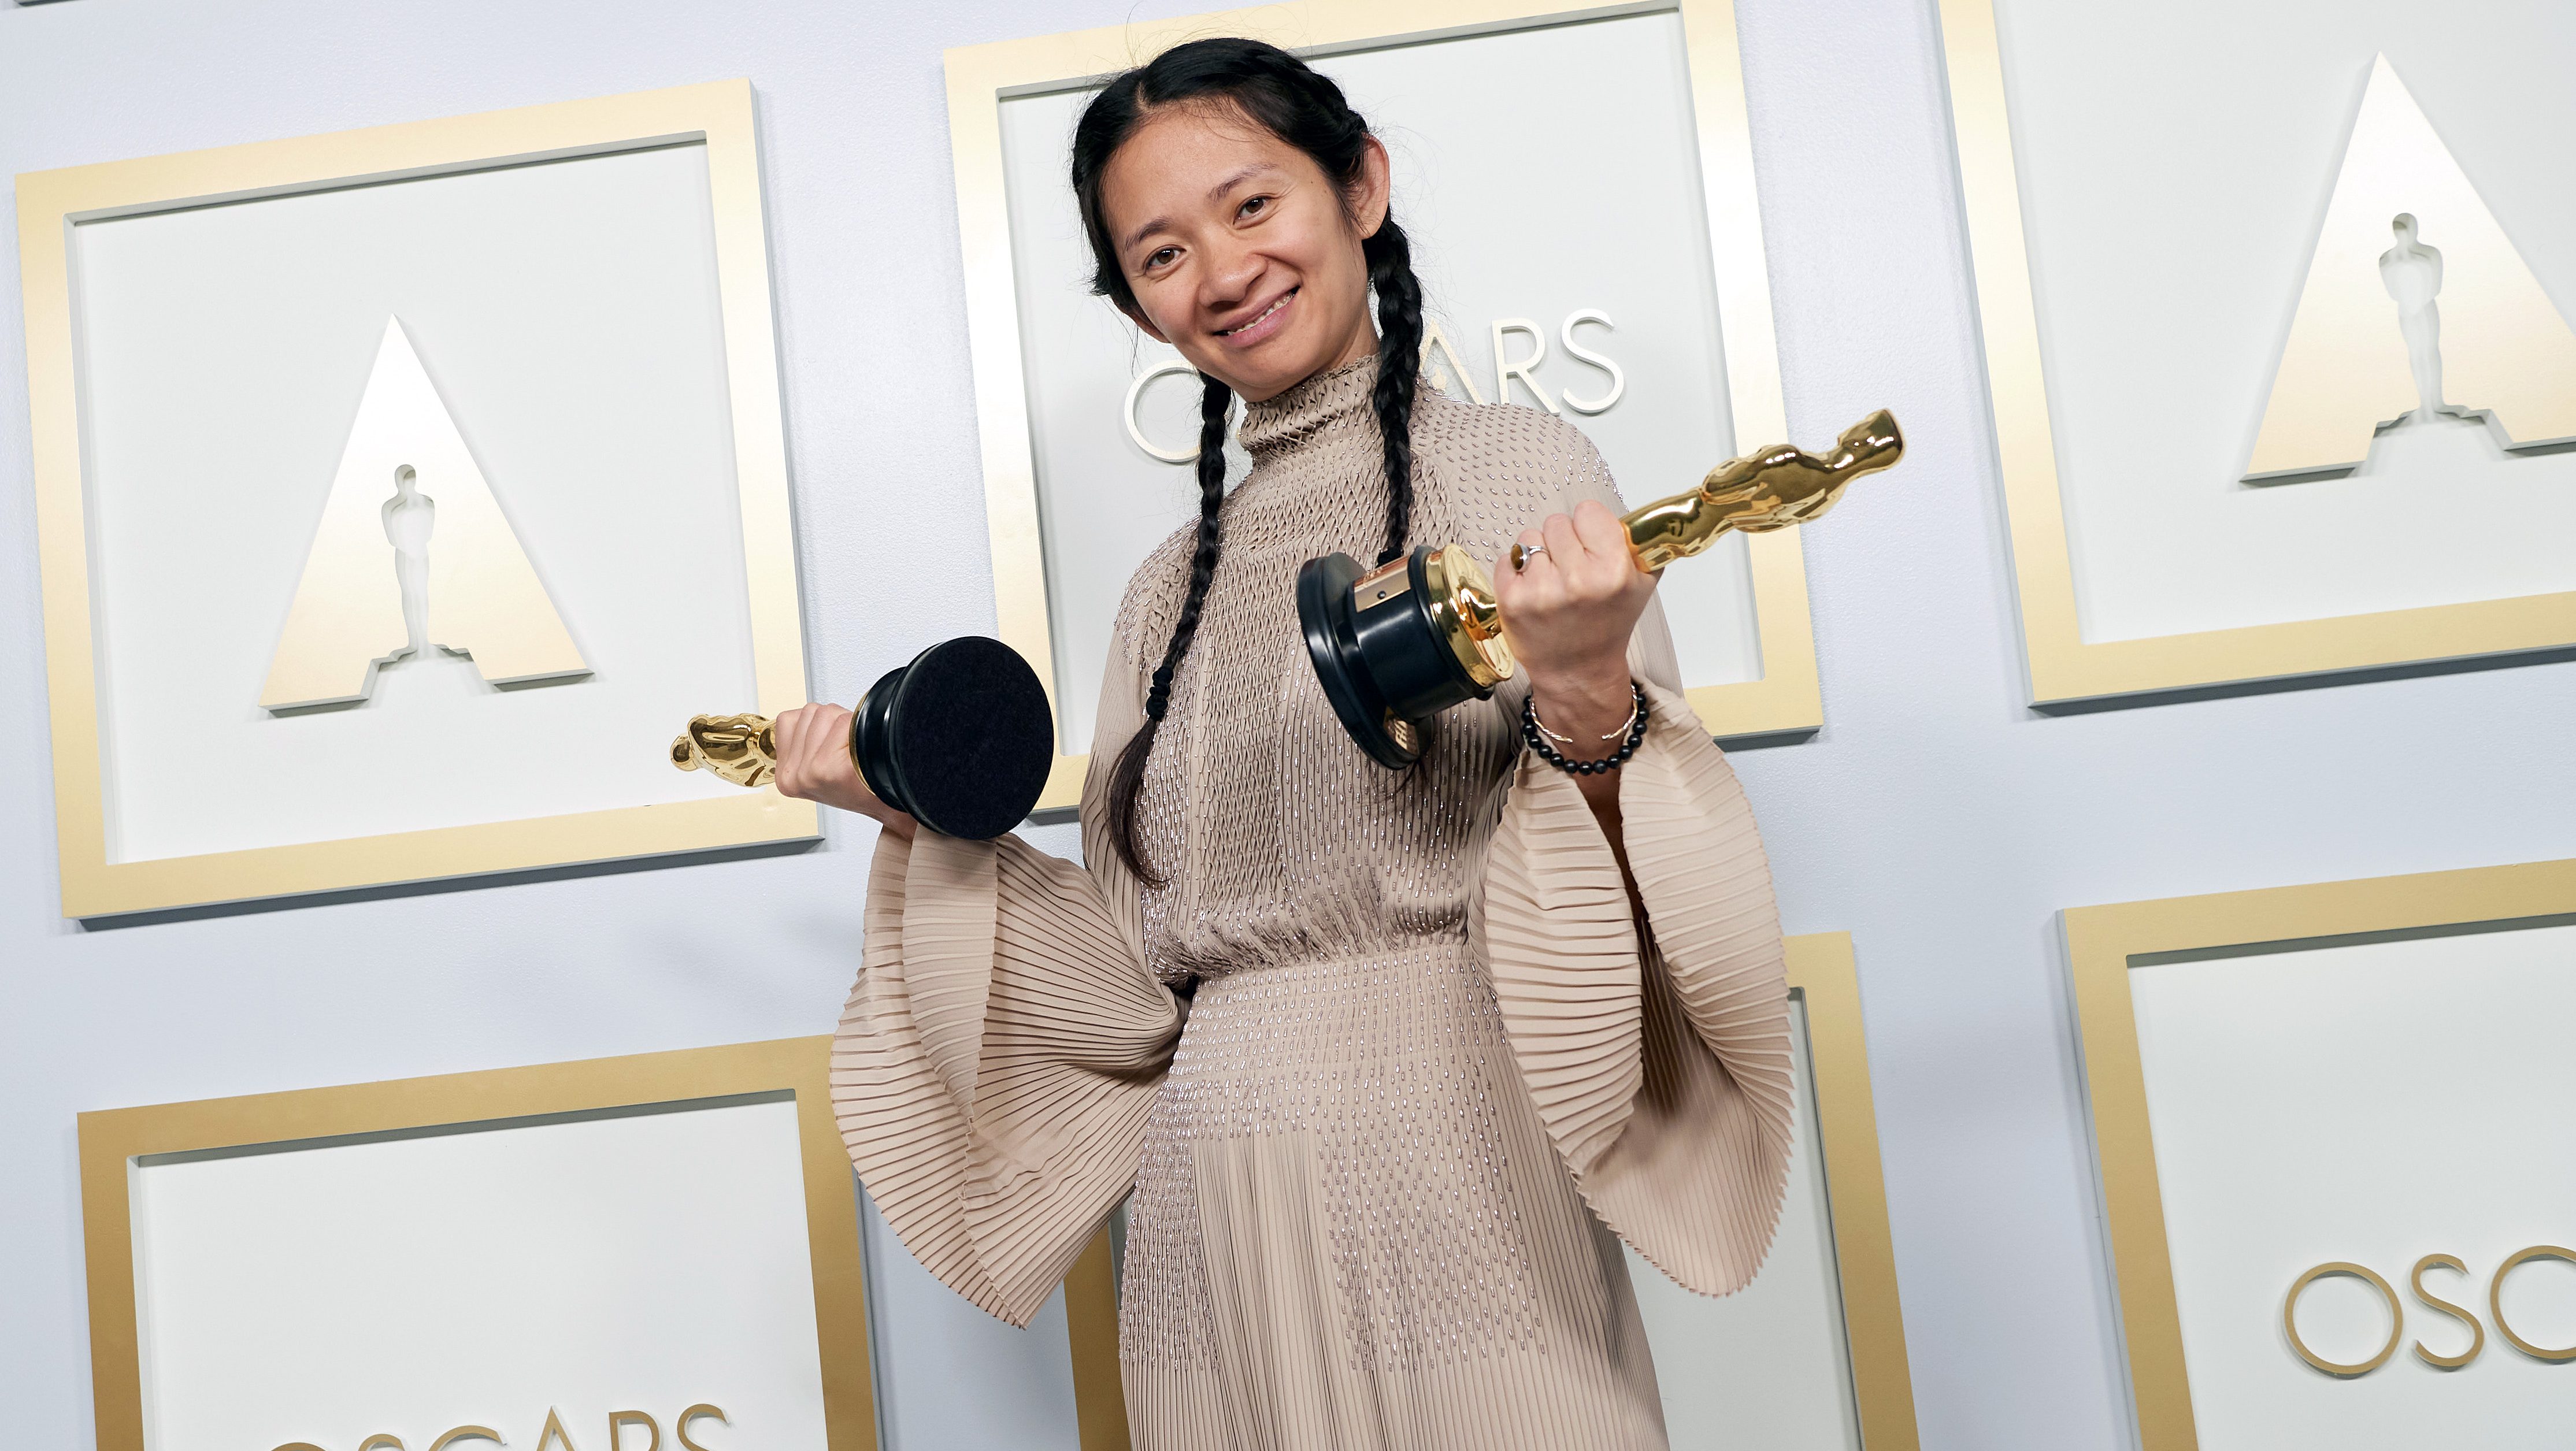 Chloé Zhao becomes the first woman of color to win Best Director during the 93rd Annual Academy Awards at Union Station on April 25, 2021 in Los Angeles, California. Zhao won for her work in 